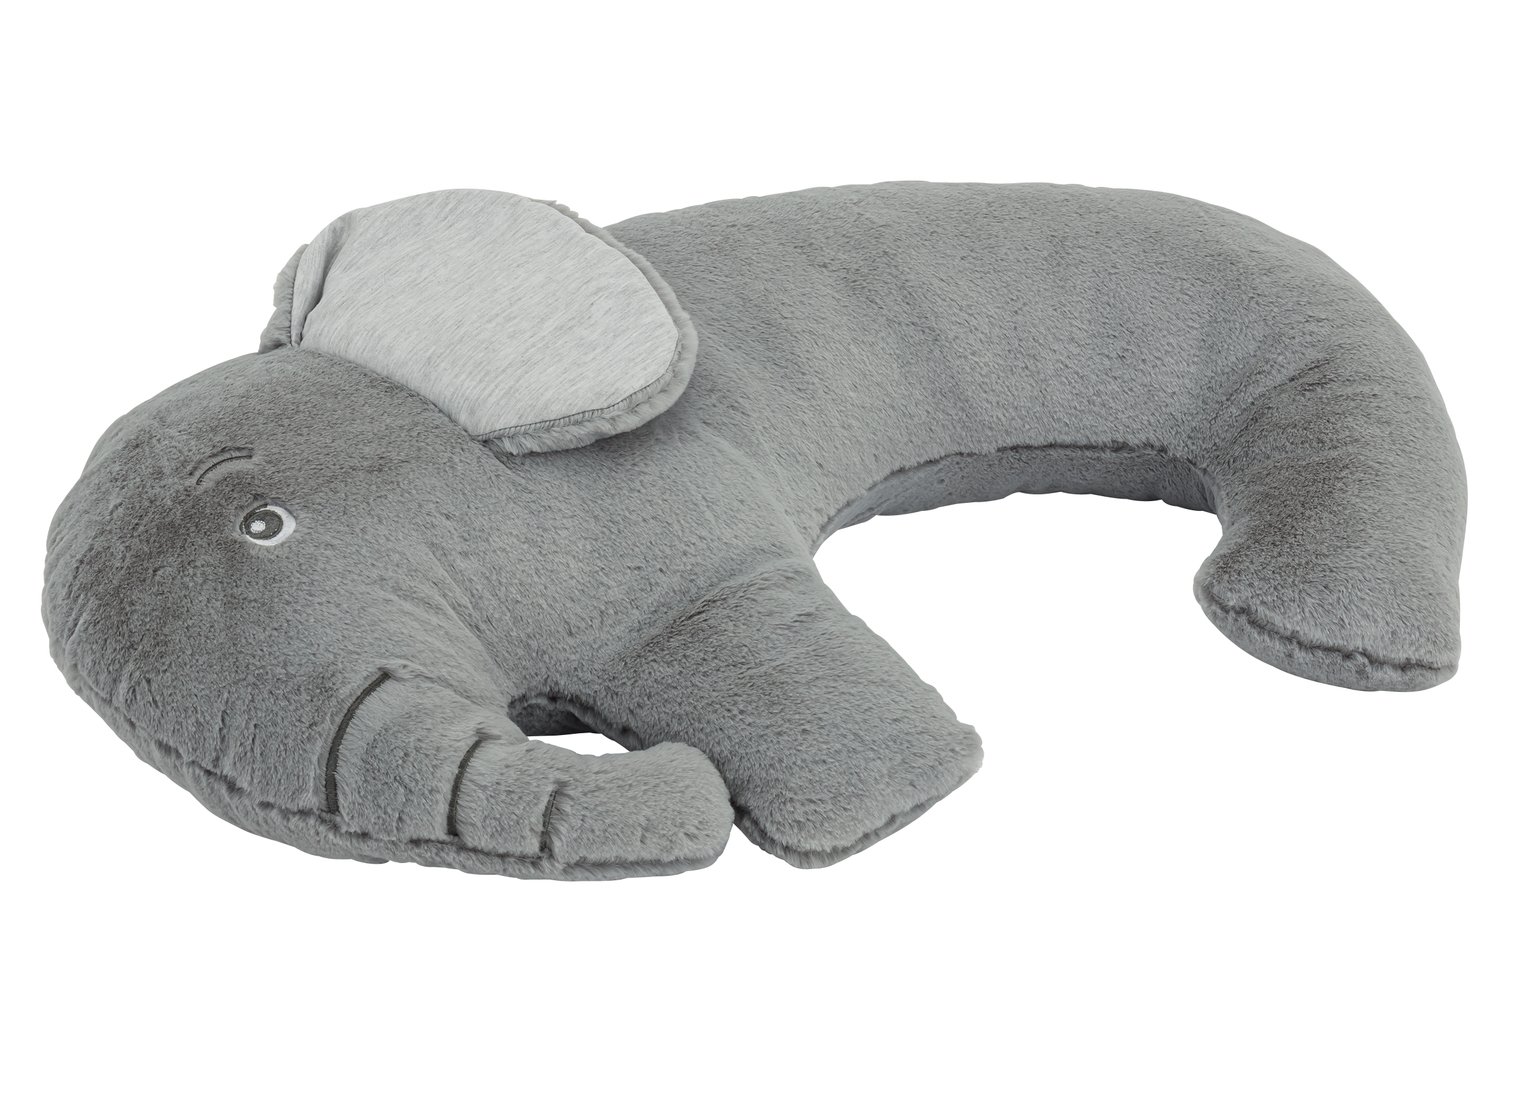 Chad Valley Sit Up and Play Elephant Review